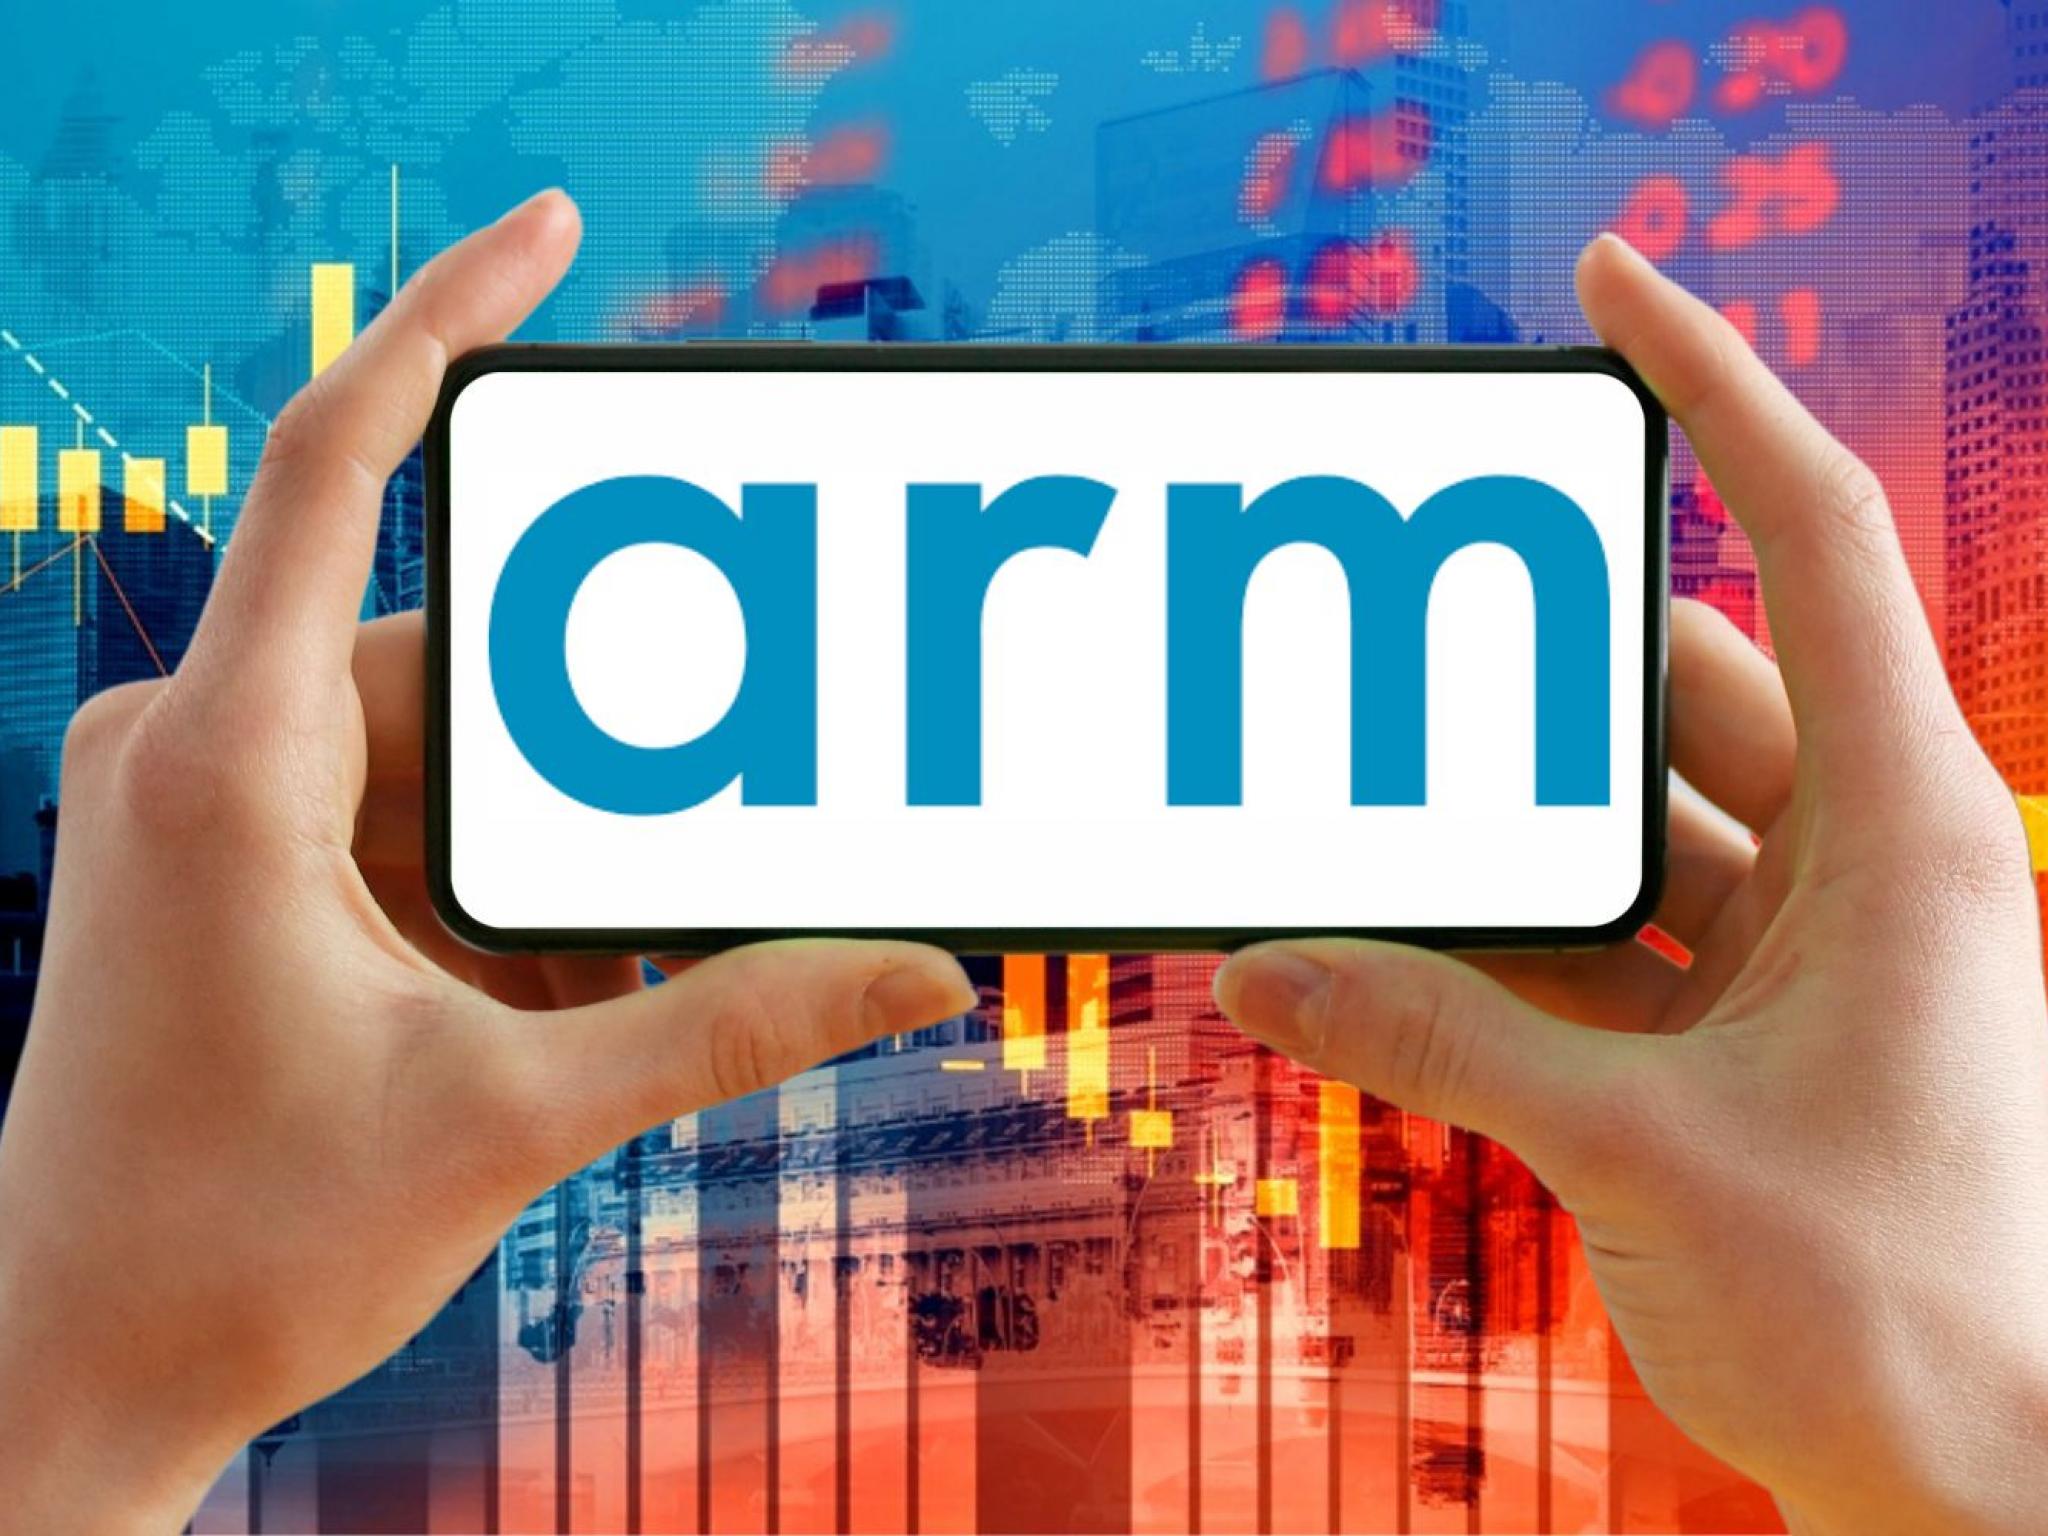  is-arm-holdings-stock-going-to-pay-dividends 